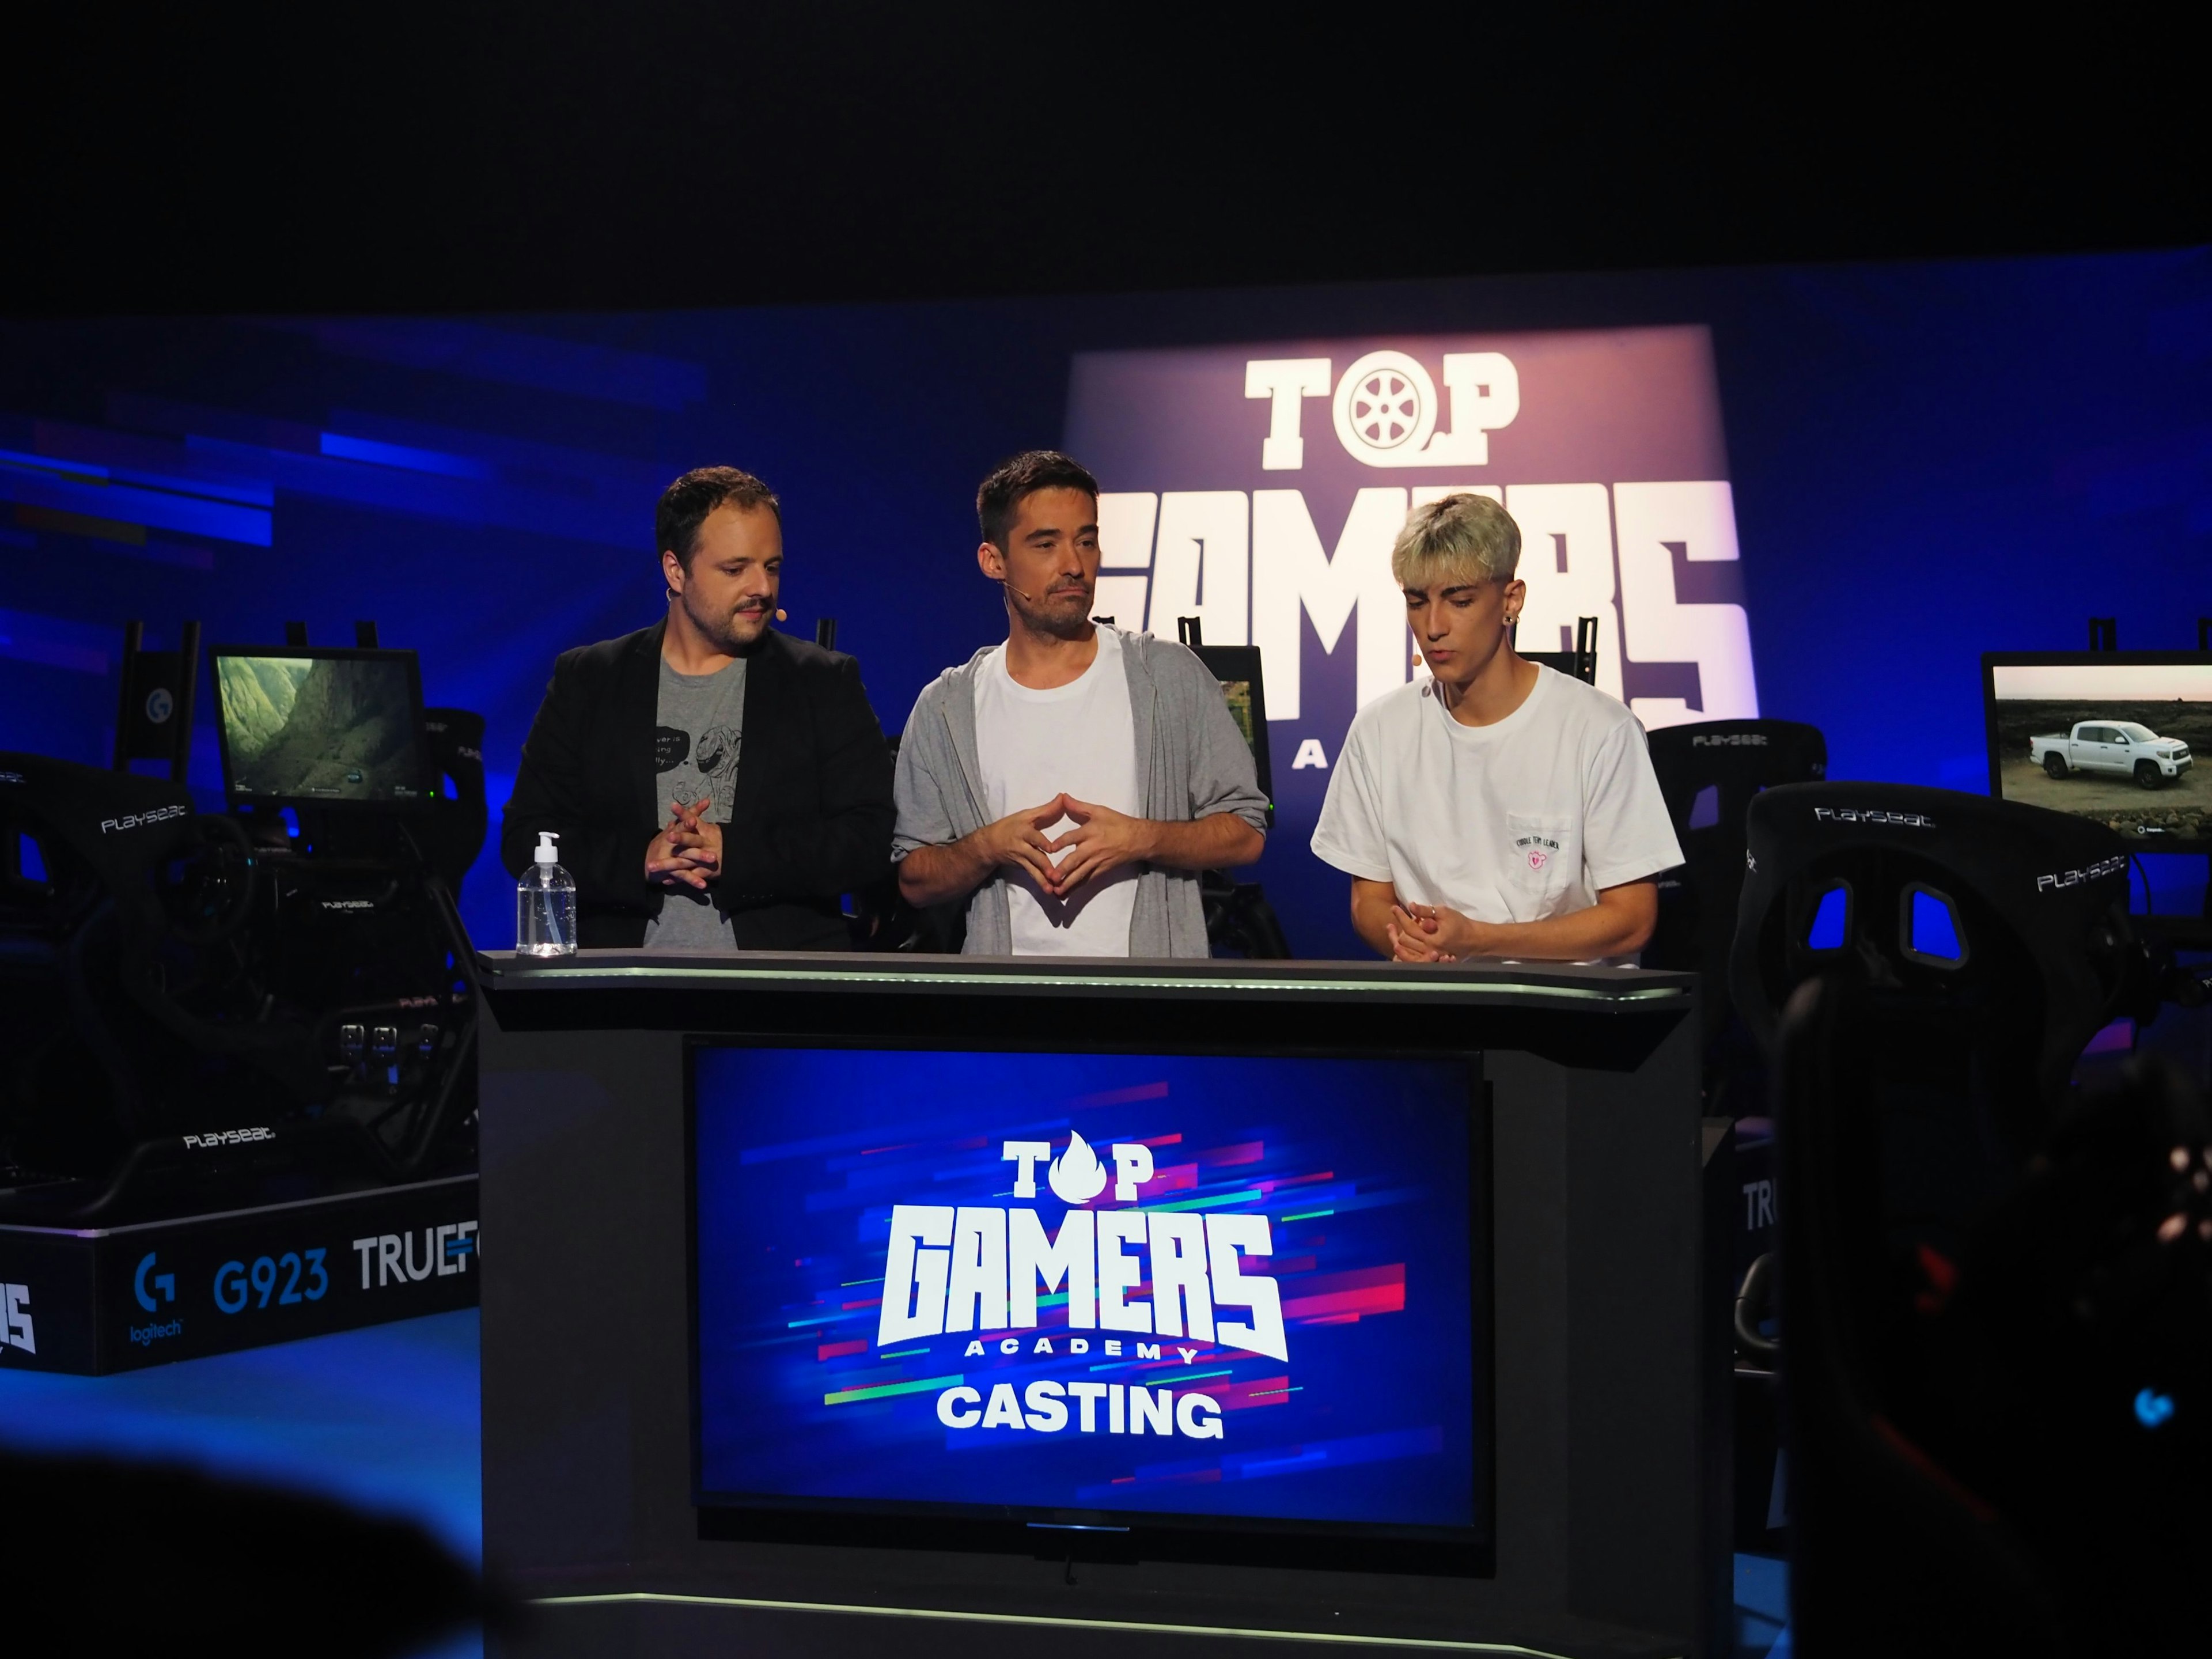 Top Gamers Academy logo in use